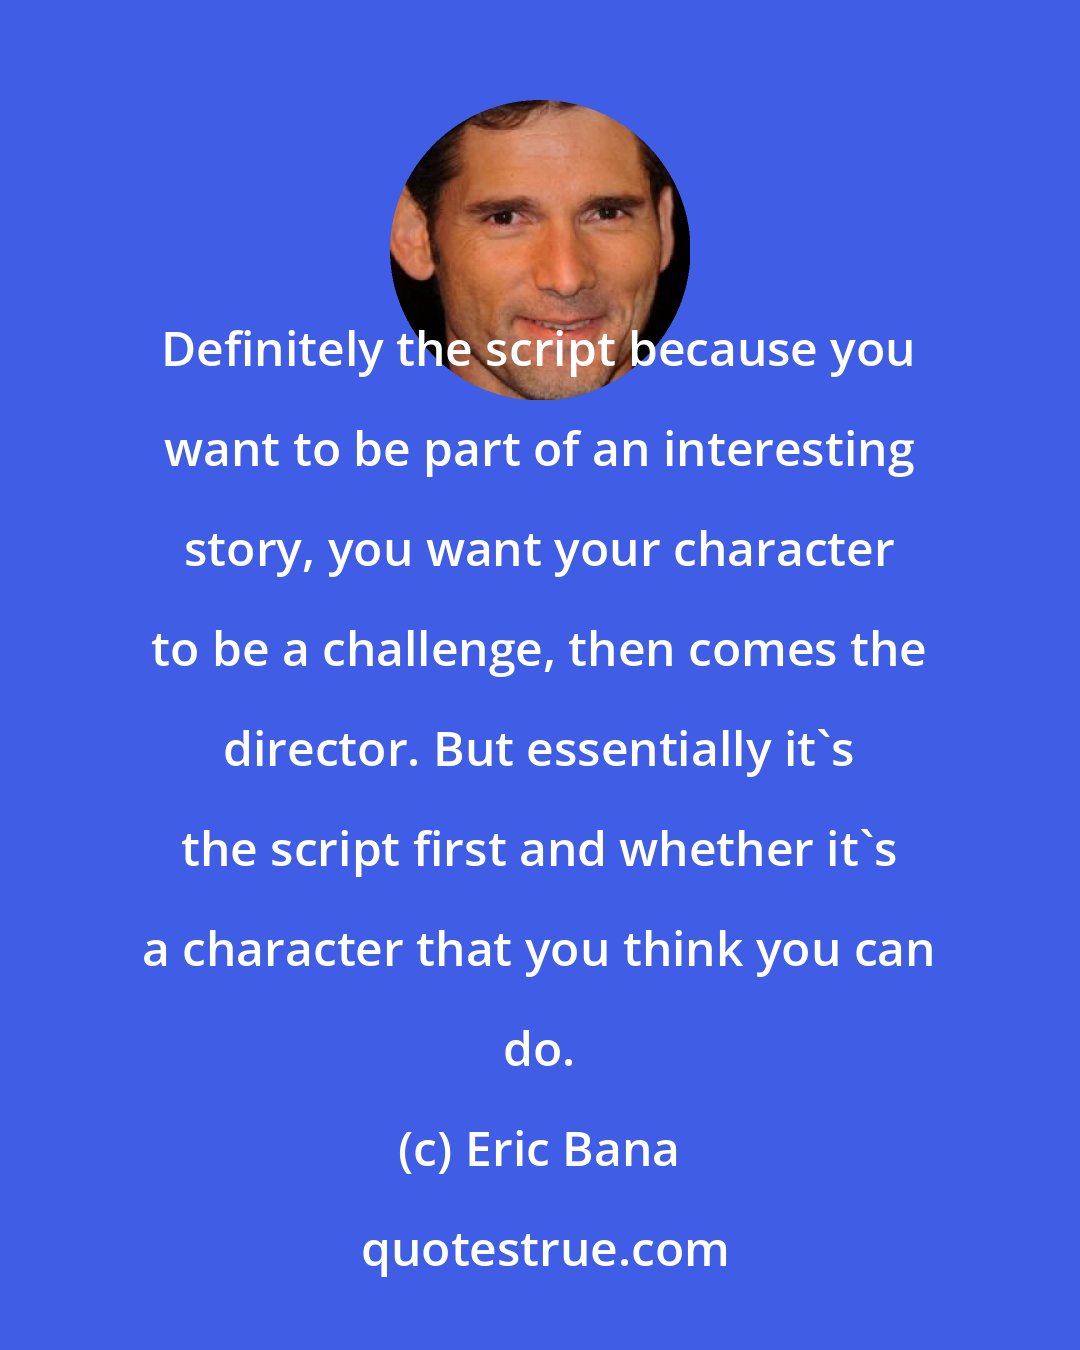 Eric Bana: Definitely the script because you want to be part of an interesting story, you want your character to be a challenge, then comes the director. But essentially it's the script first and whether it's a character that you think you can do.